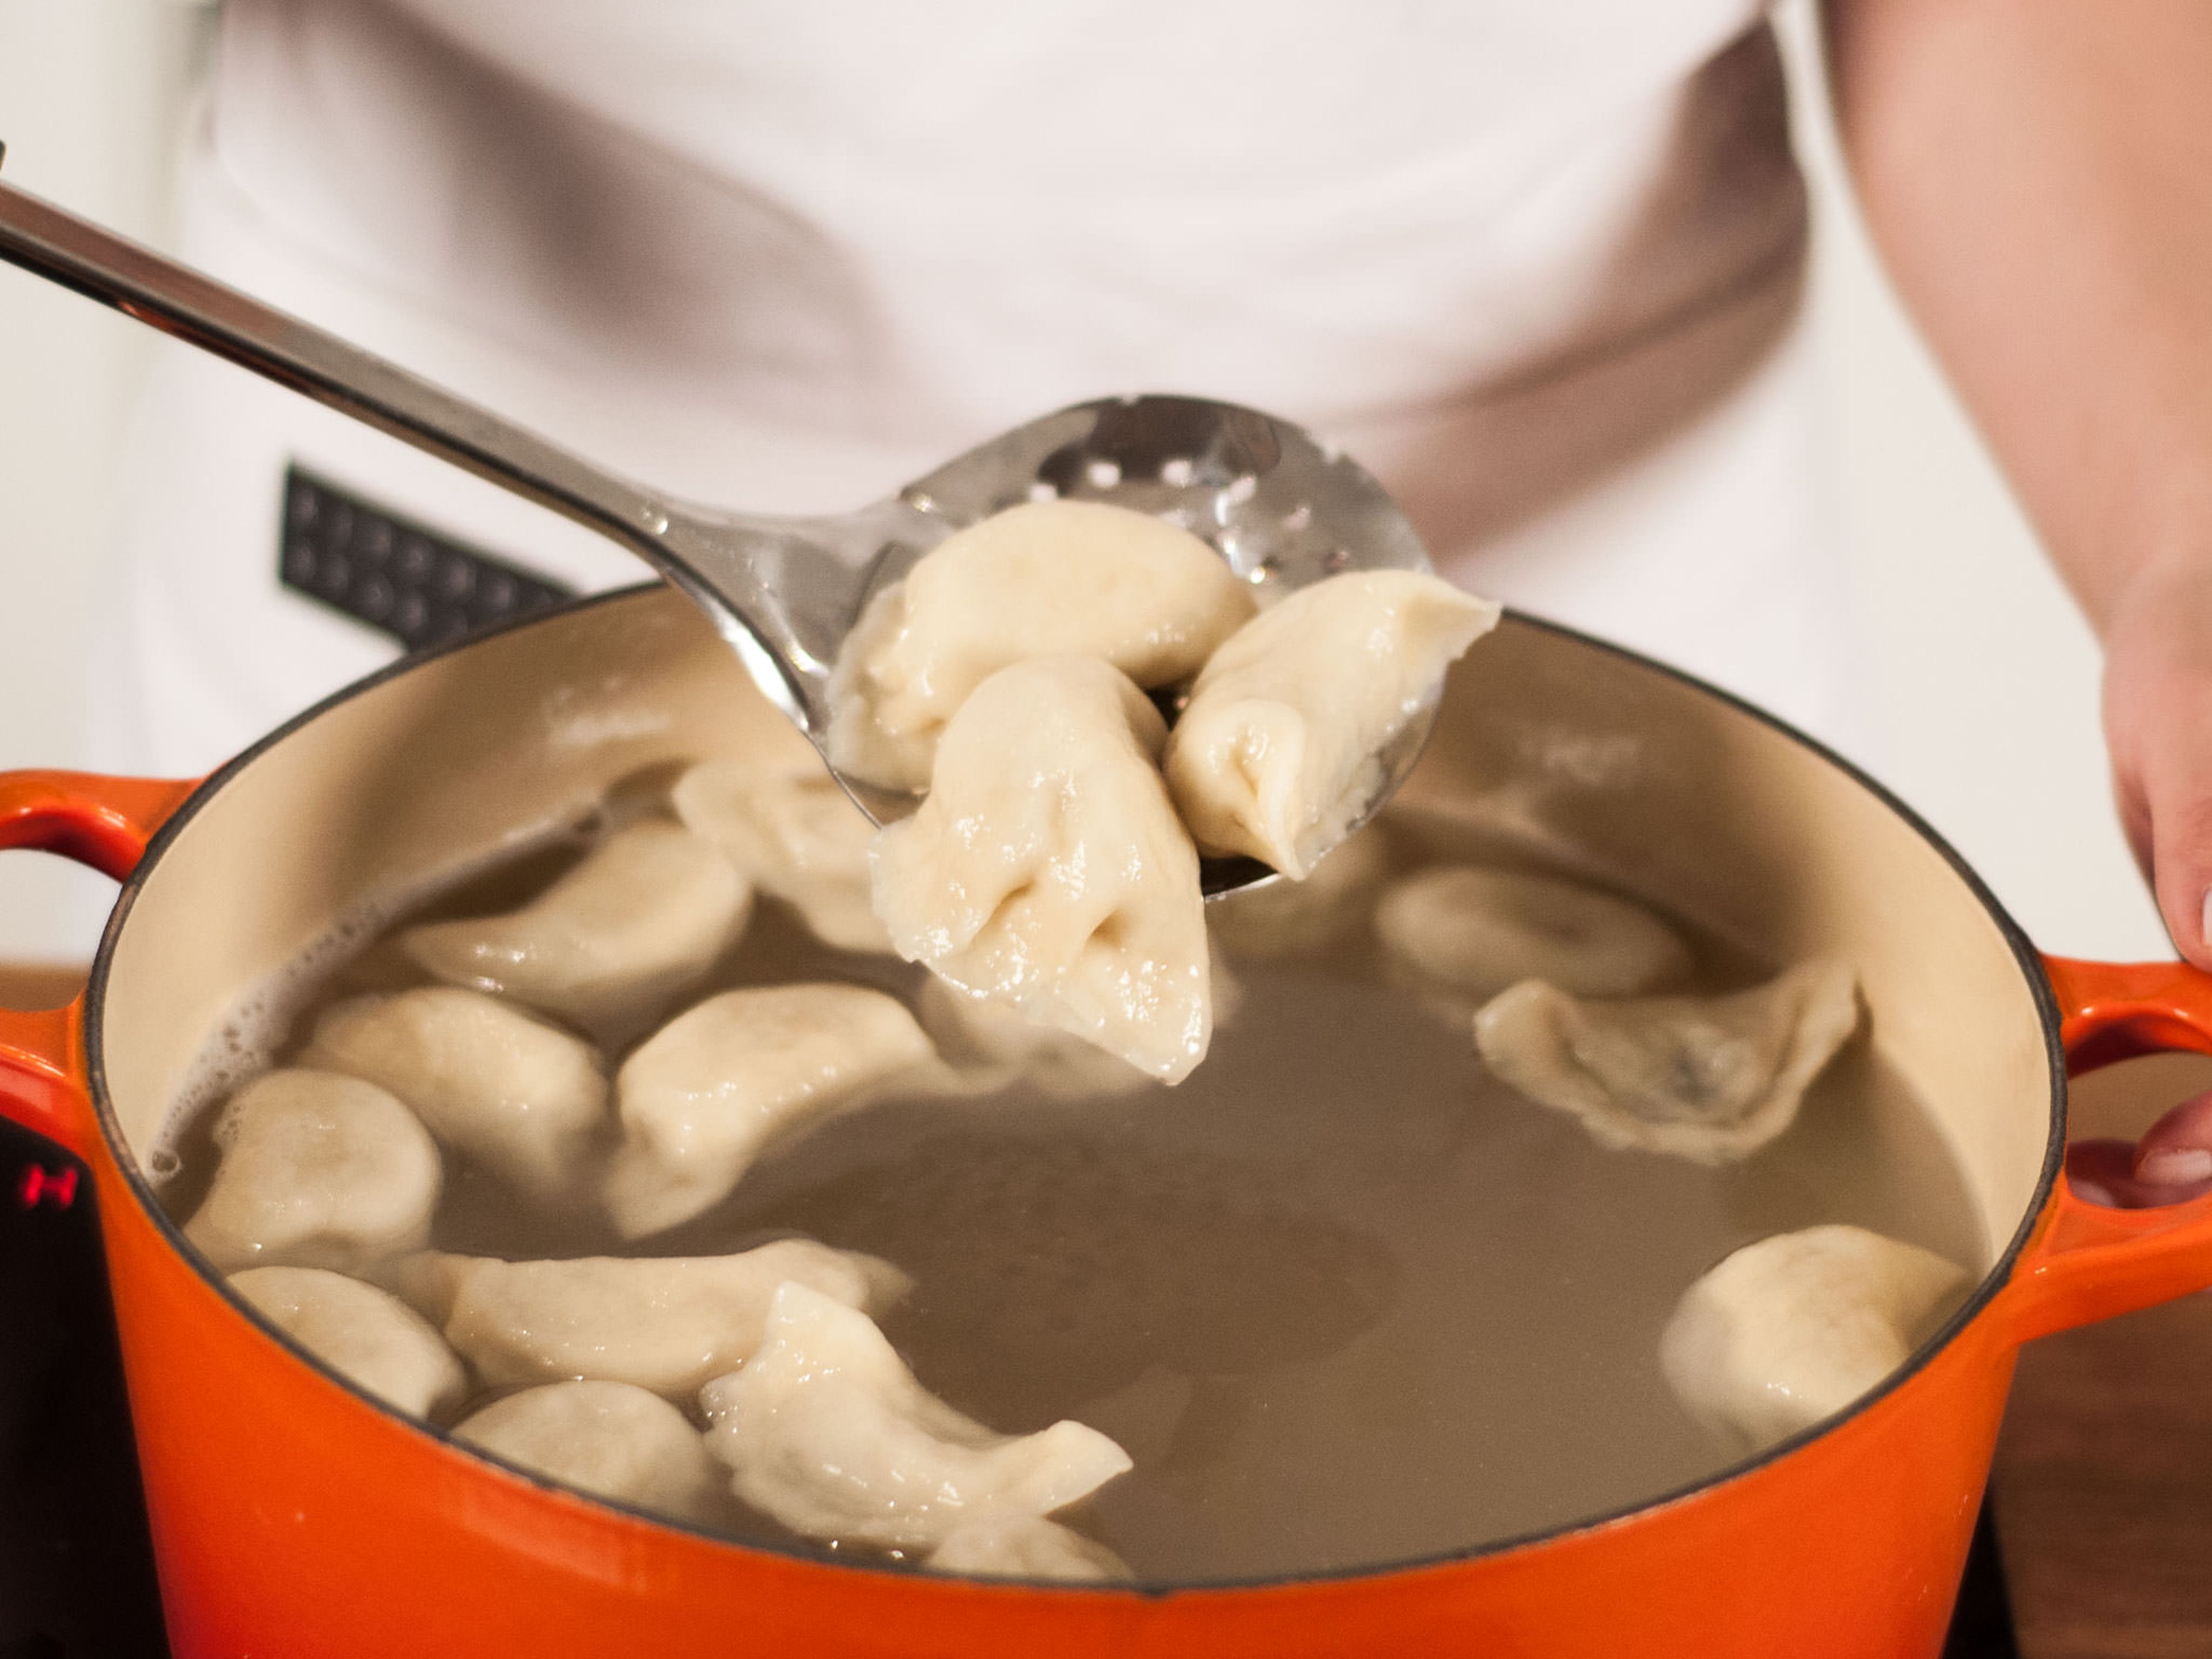 When the fourth cup of cold water is added, immediately turn off the heat and remove dumplings from the pan using a skimmer. Place on a plate and allow to drain. Cook remaining dumplings.